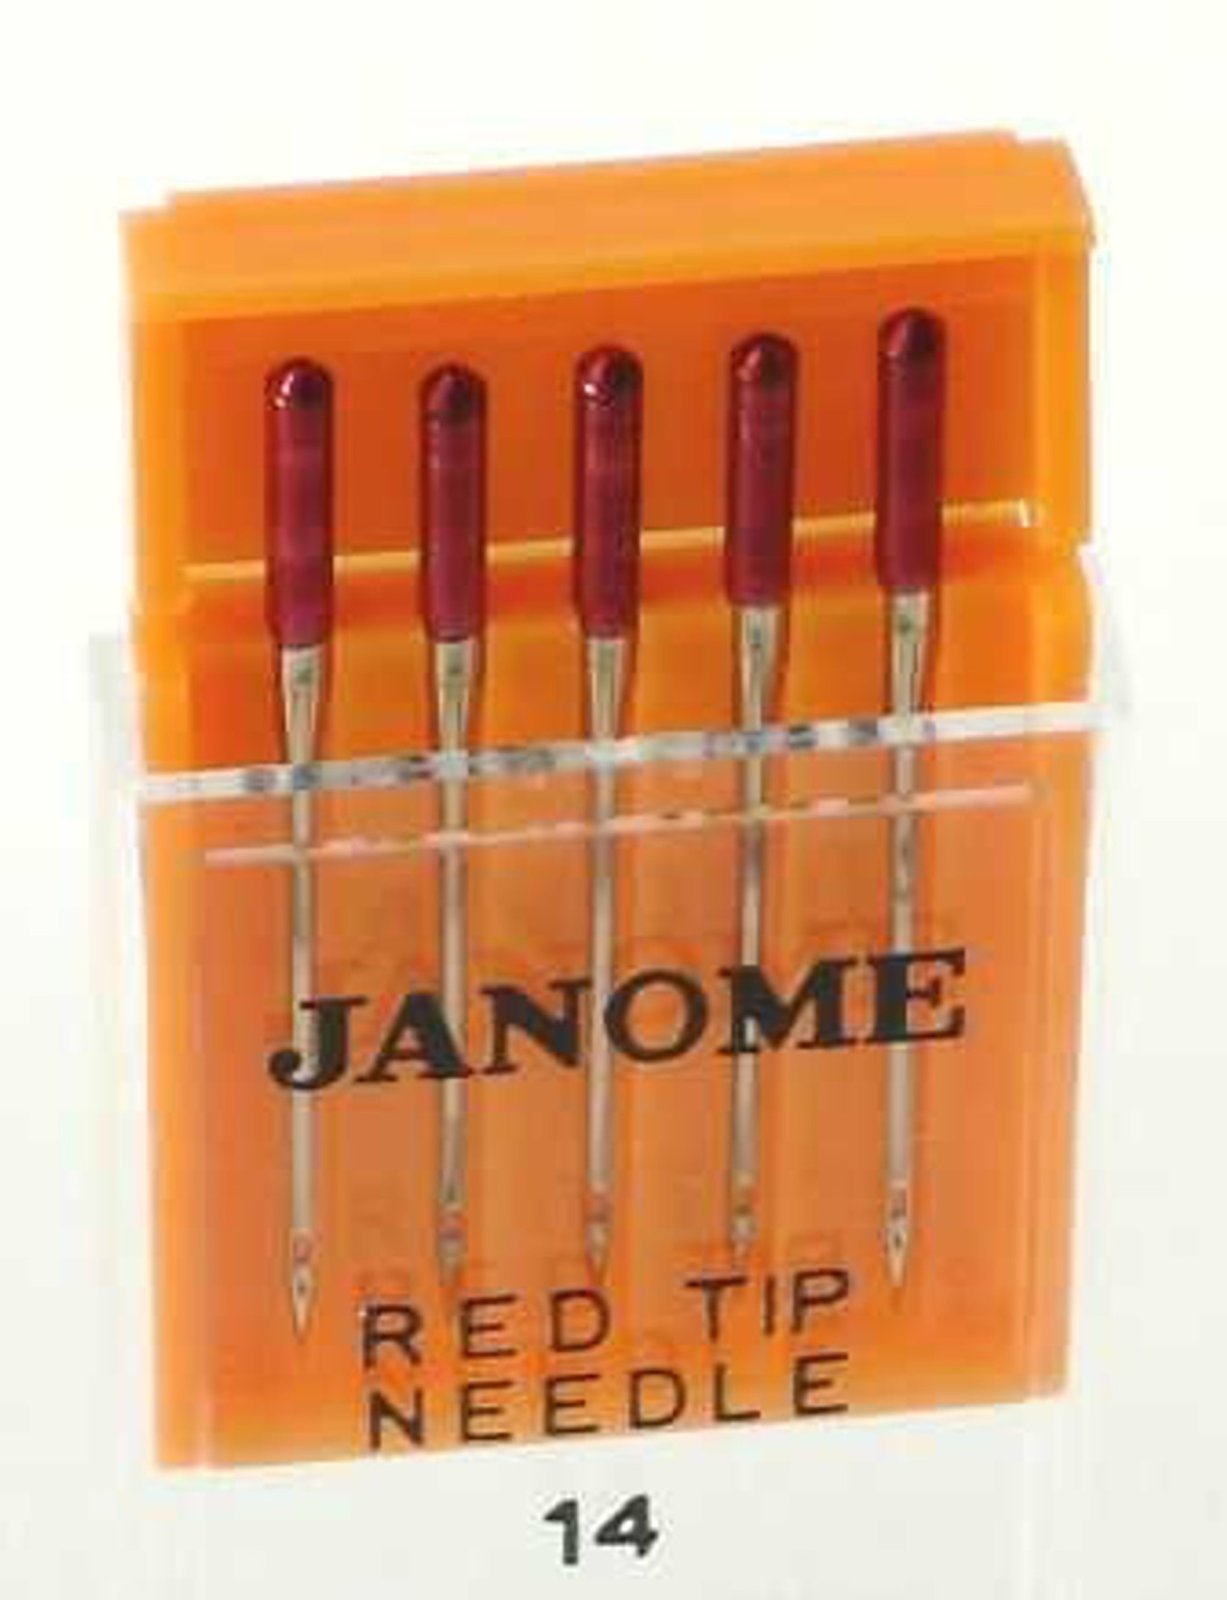 Red Tip Needle Size 14